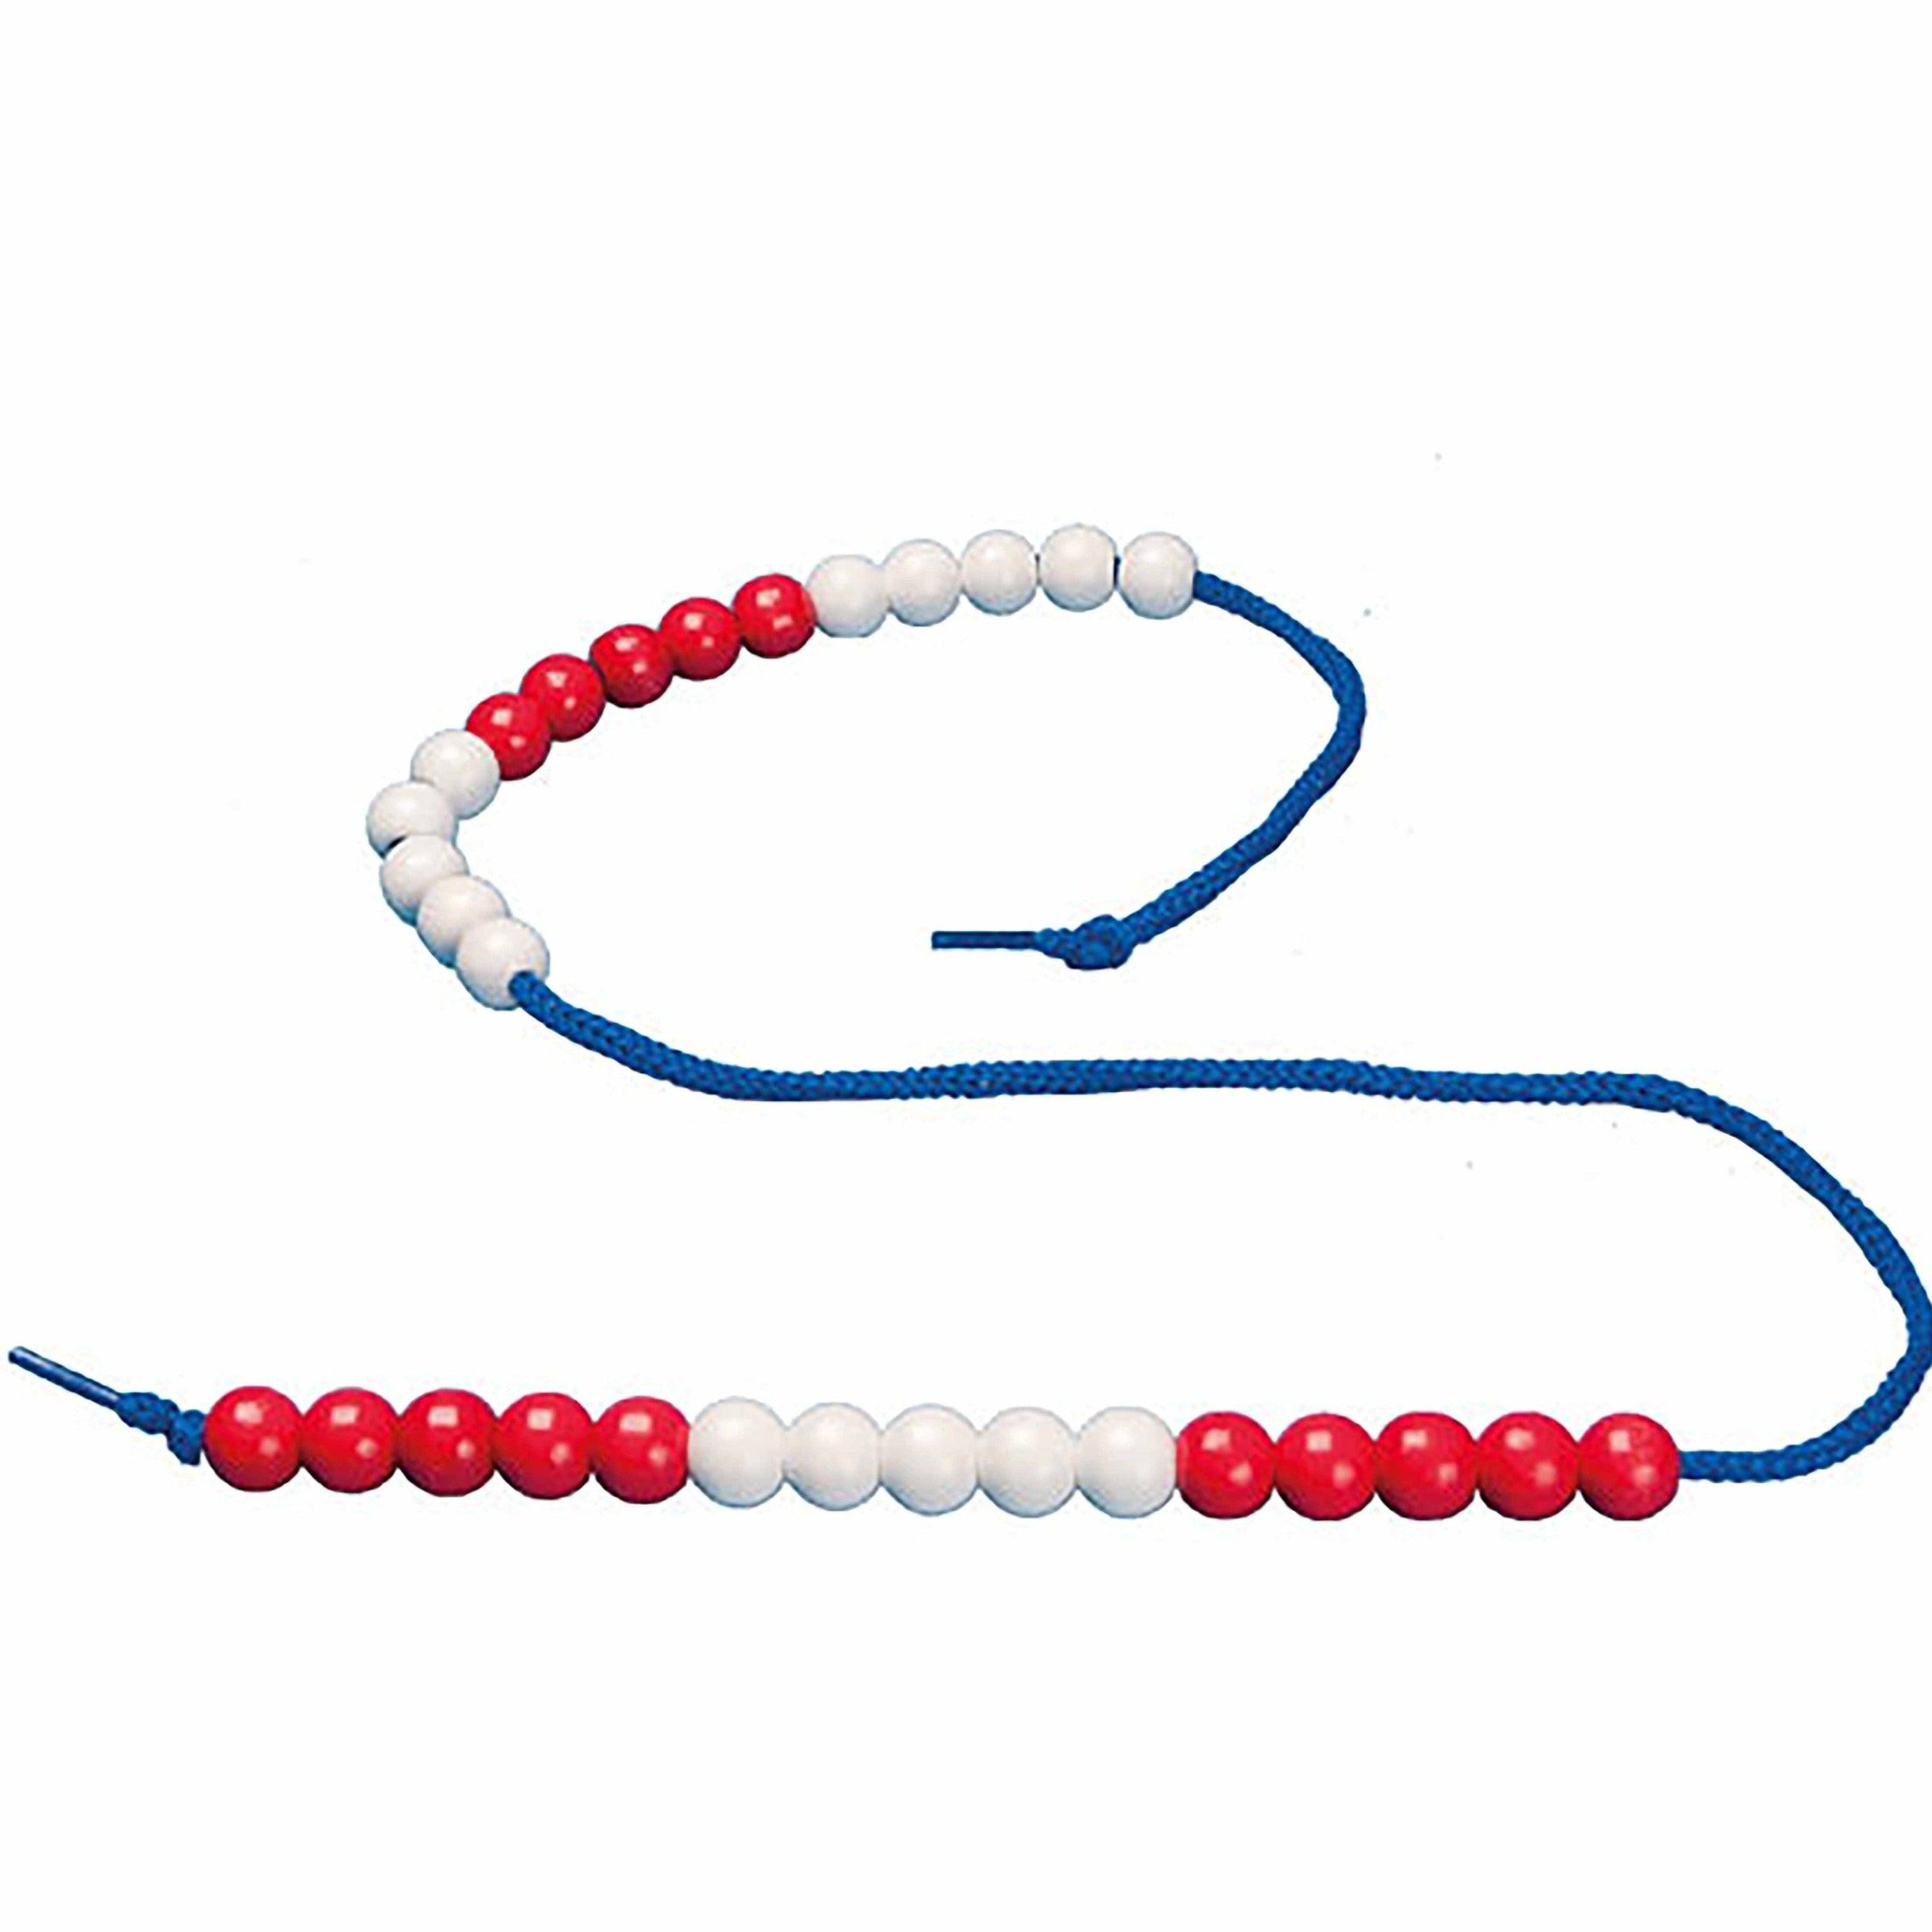 Educo: Mathematical Bead String Up to 30 Pupils